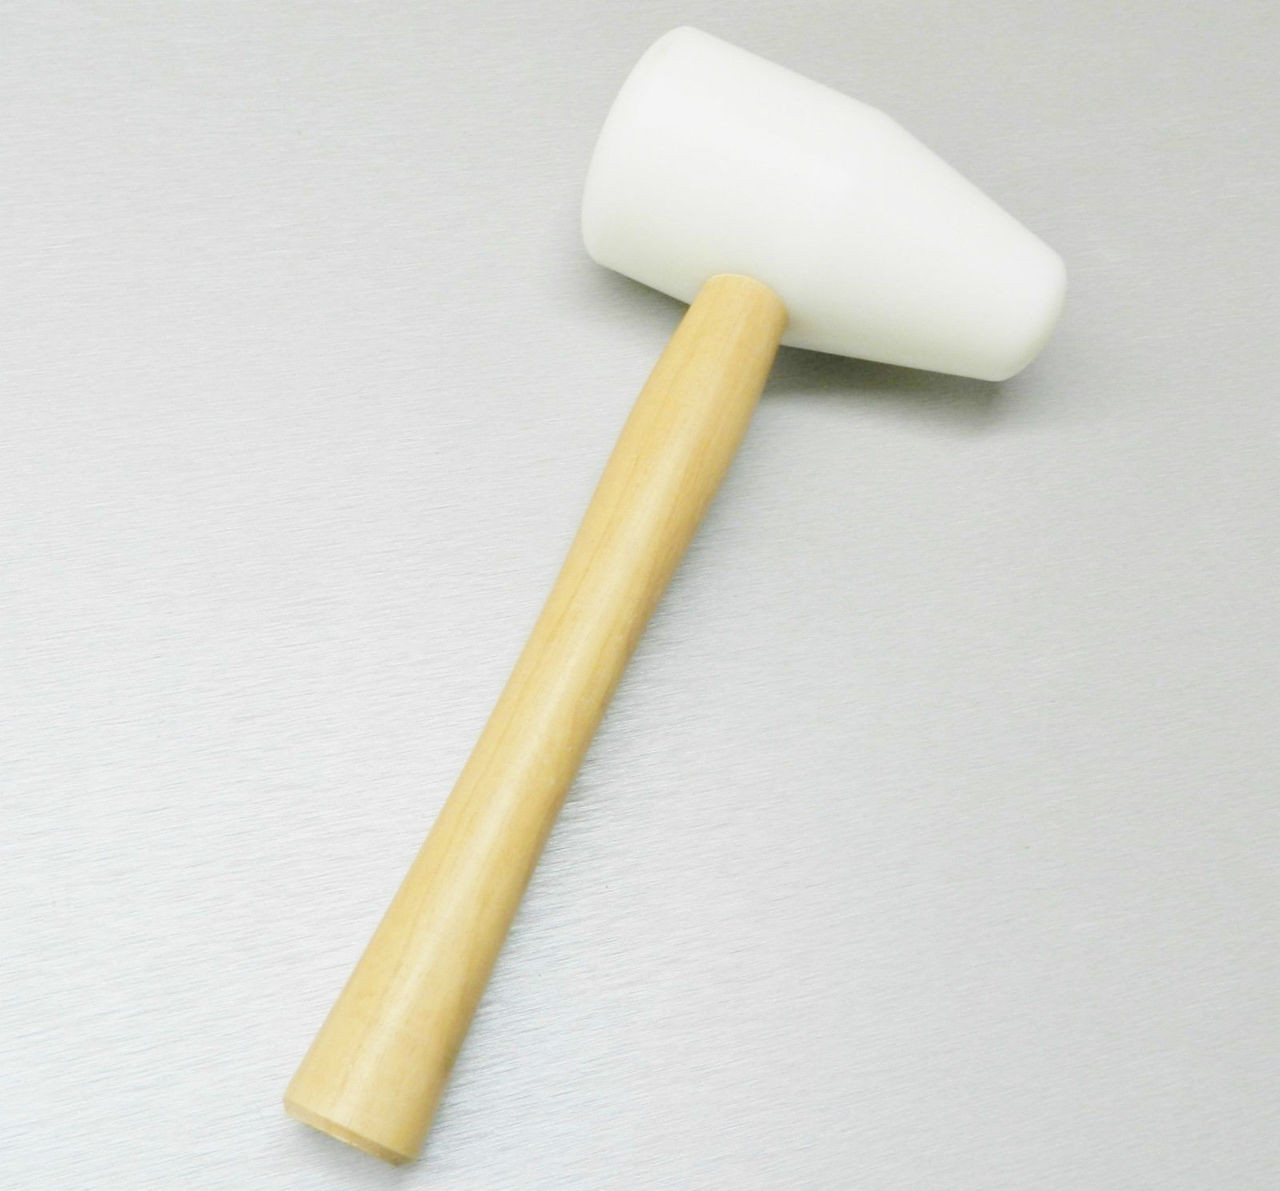 Nylon Hammer X Large Plastic Mallet 2-1/2 Face Jewelry Metalsmith Forming